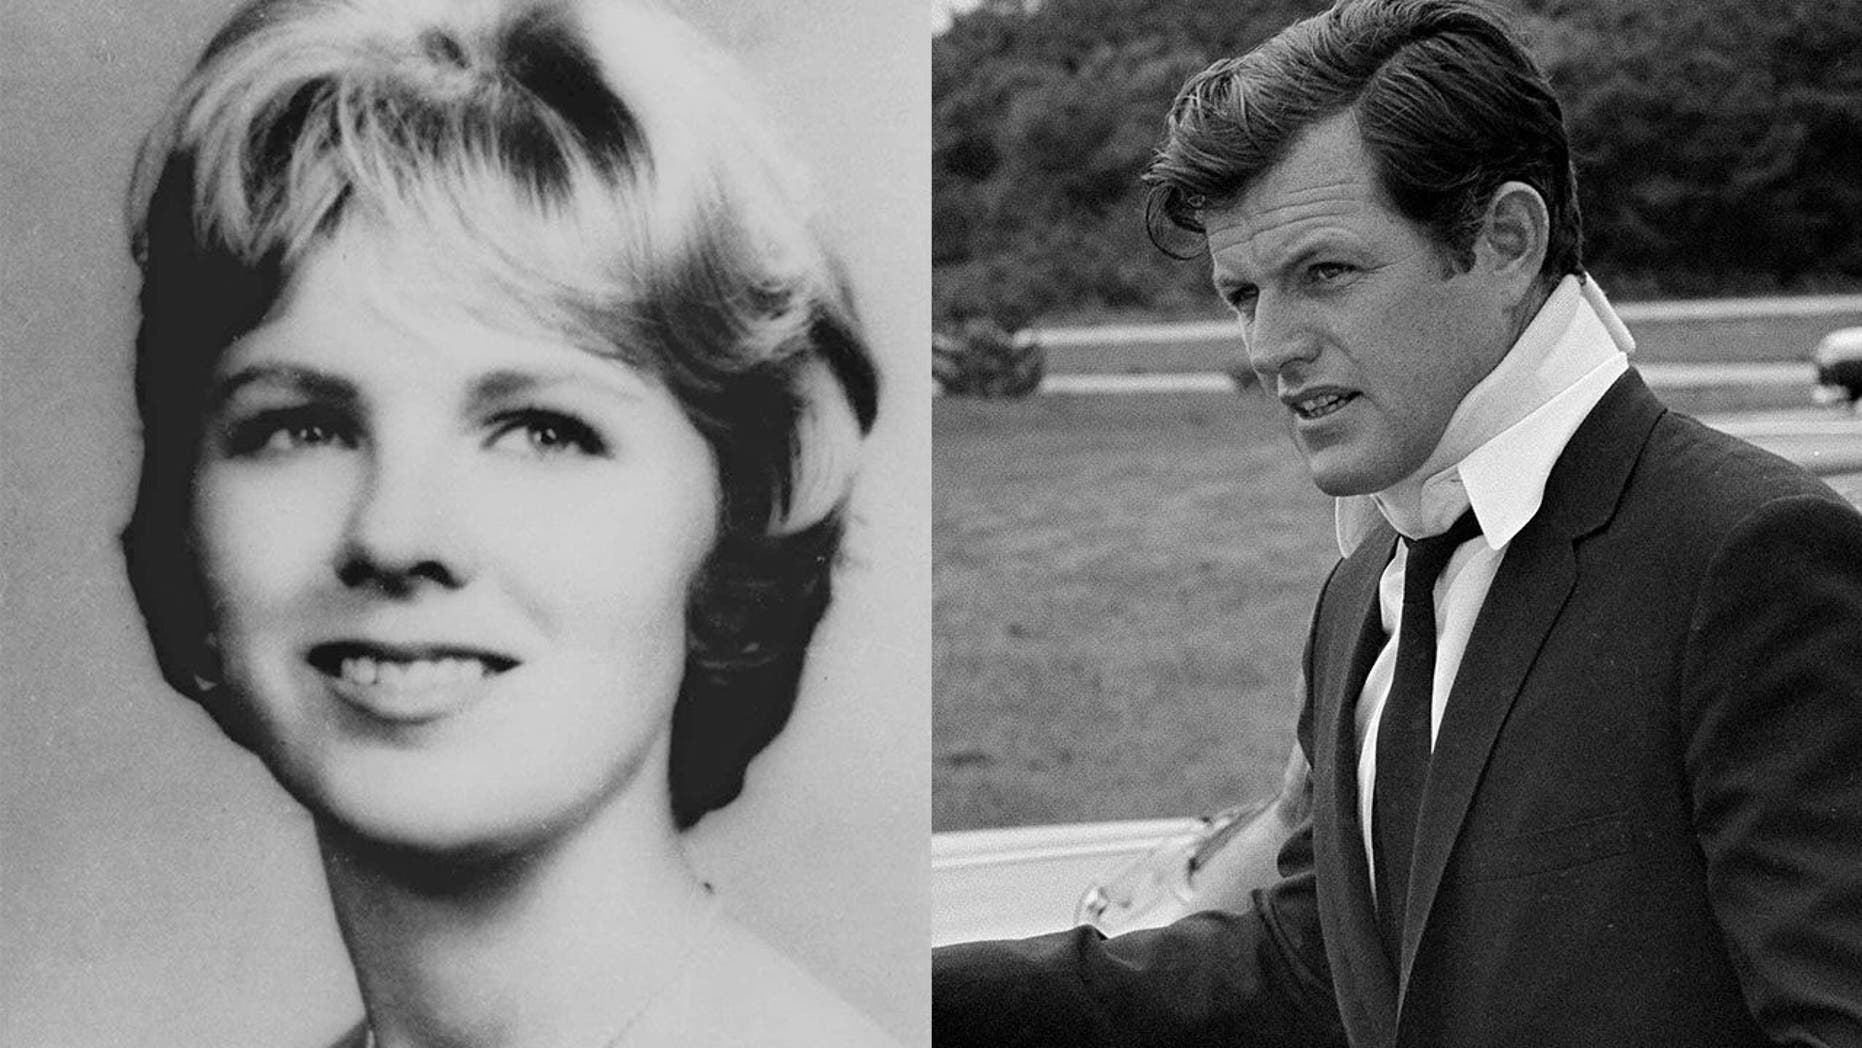 Chappaquiddick Ted Kennedy Scandal That Left A Young Woman Dead Chronicled In New Doc Fox News